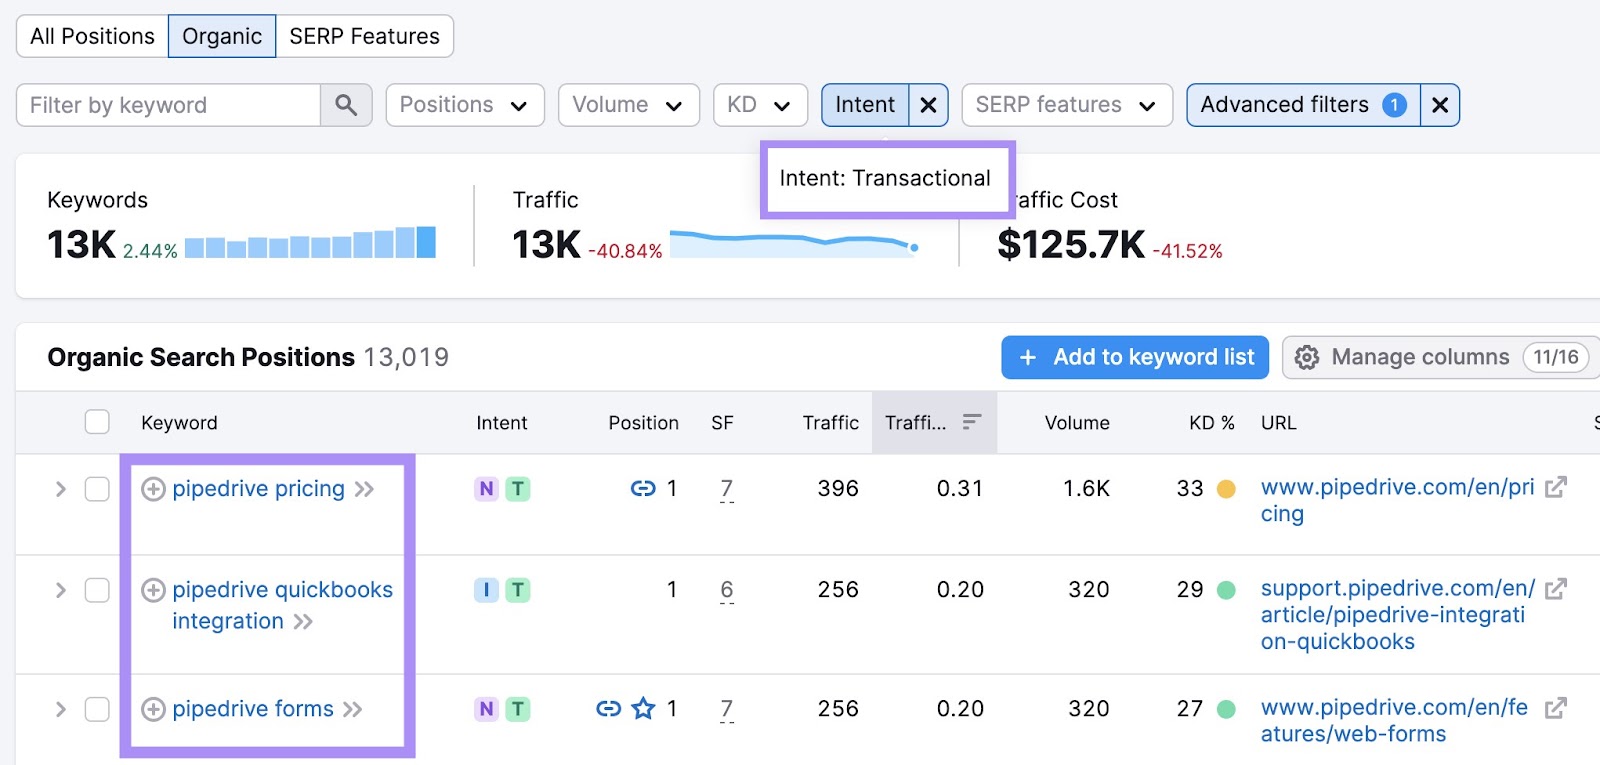 “pipedrive pricing” “pipedrive quickbooks integration” “pipedrive forms” keywords show transactional intent